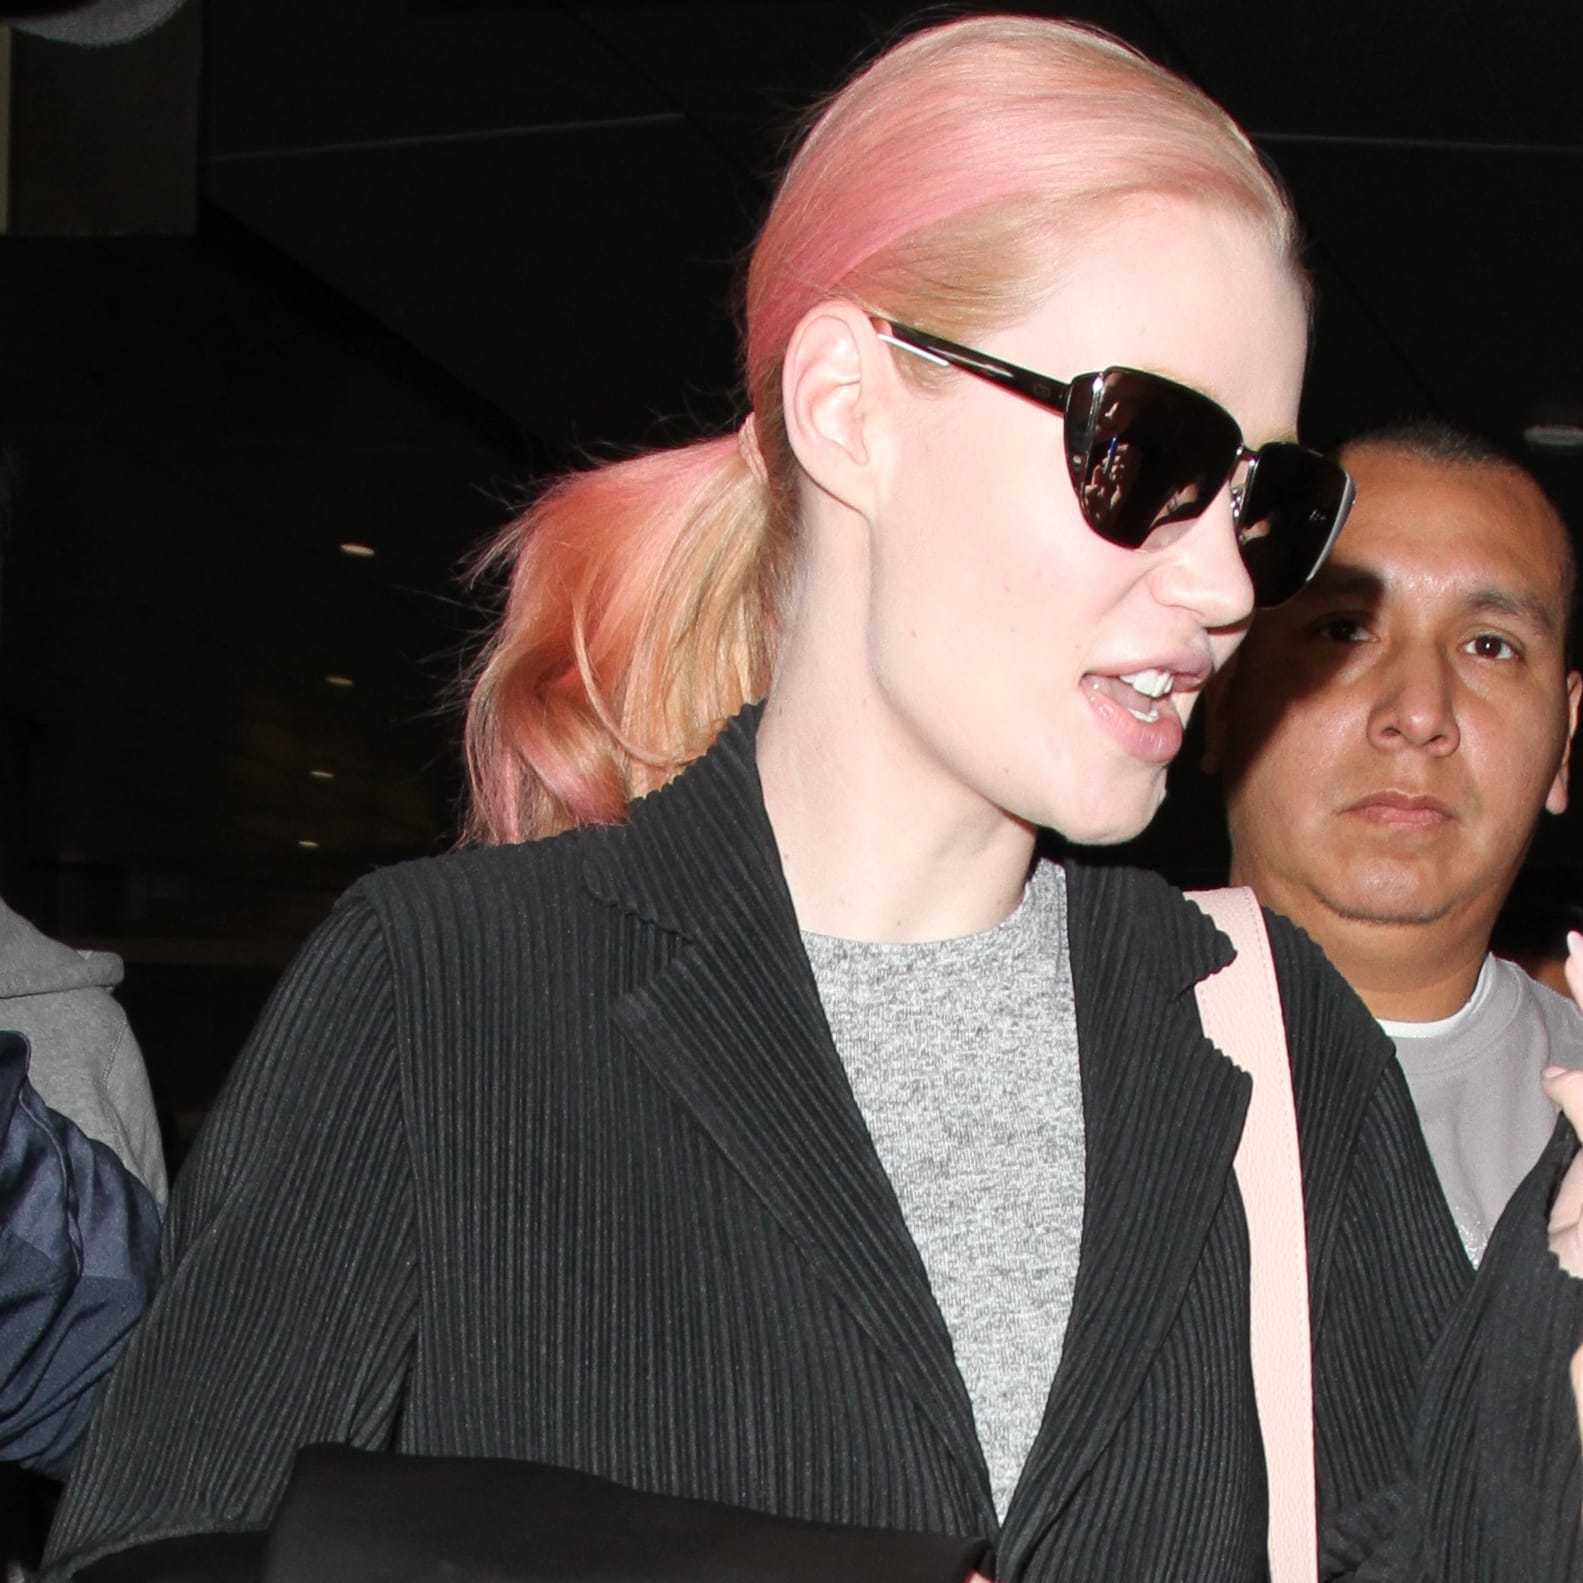 Iggy Azalea is seen with pink hair at LAX